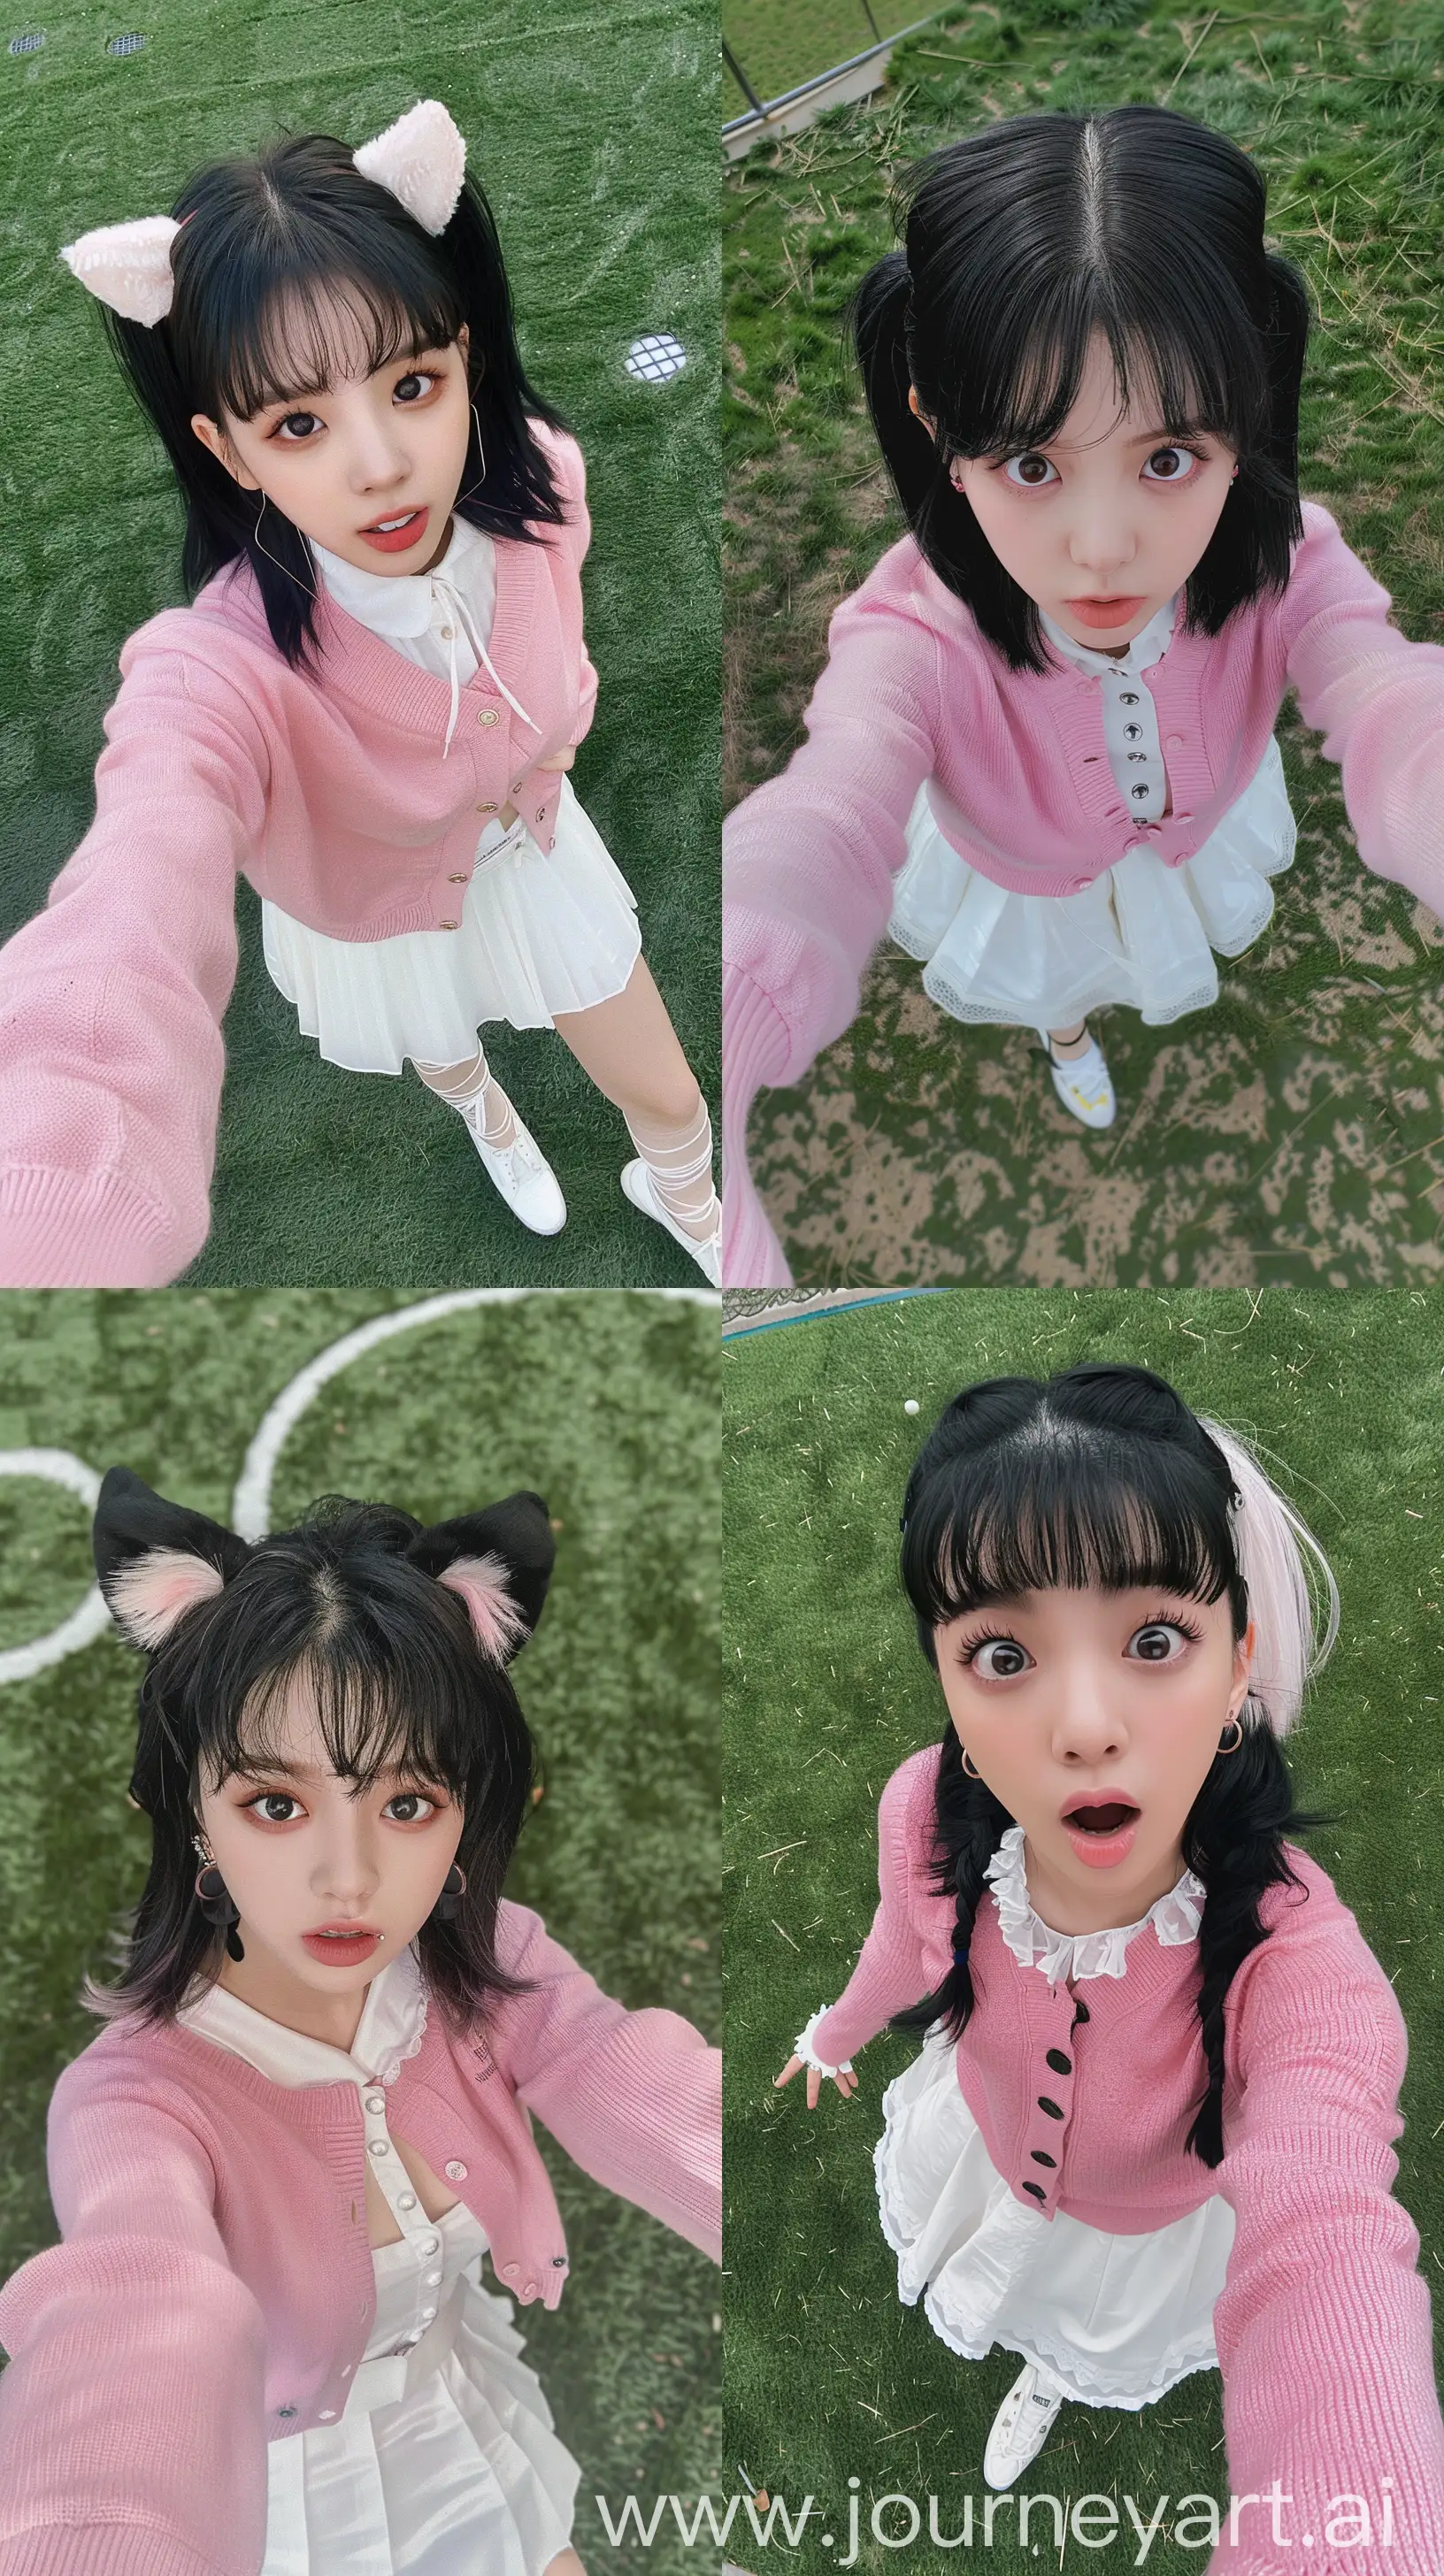 Aesthetic instagram selfie blackpink's jennie with black wolfcut hair and wide set eyes, wearing pink cardigan and white skirt, standing on grass --ar 9:16